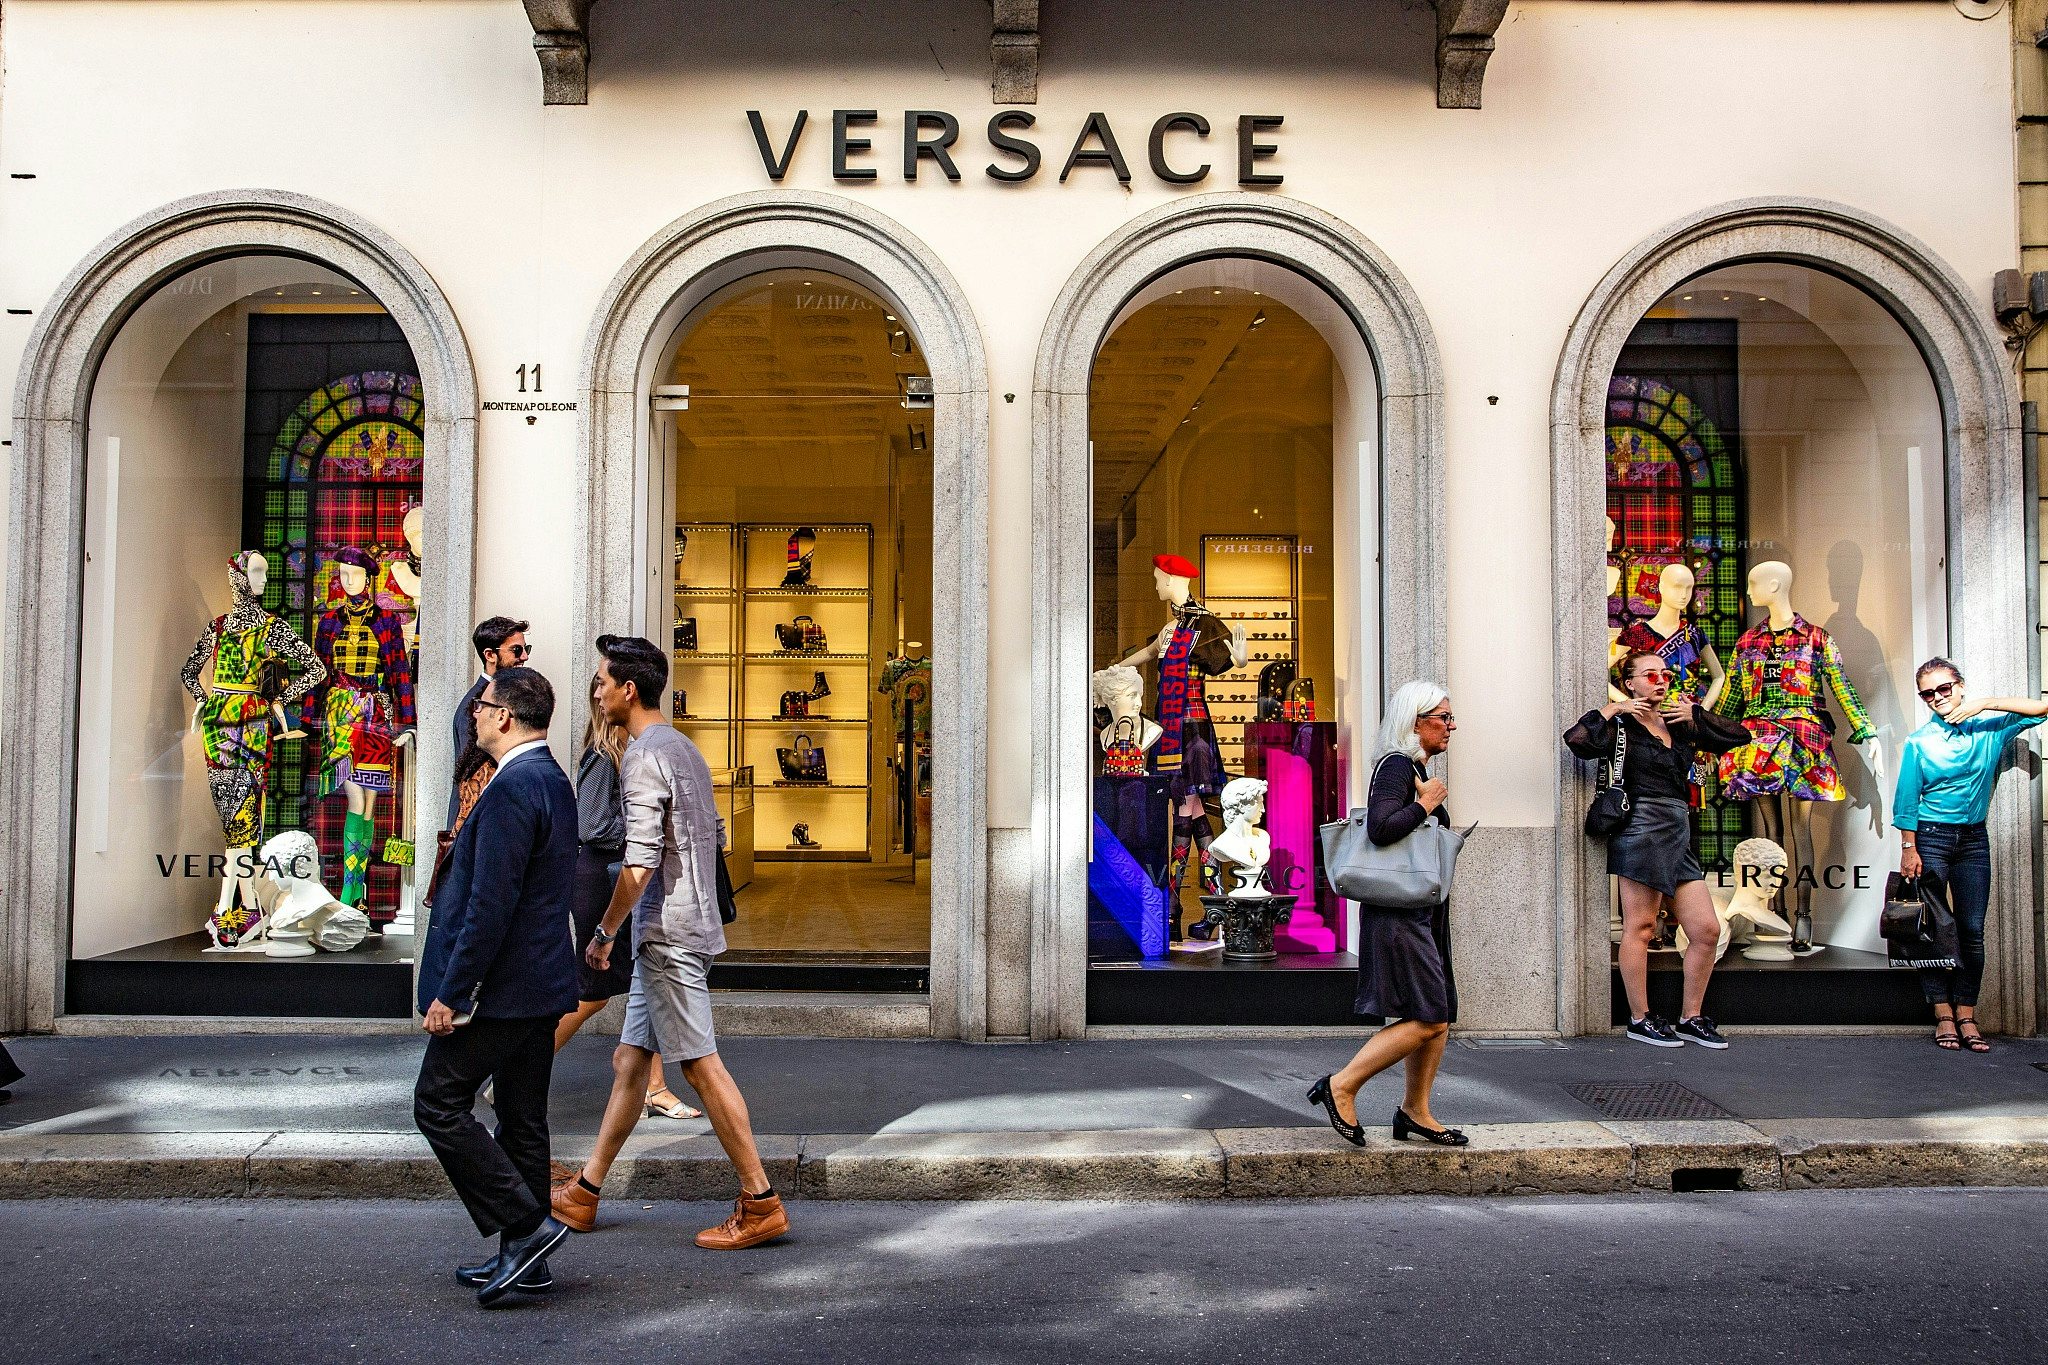 Handbag maker Michael Kors Holding Ltd. is nearing an agreement to buy Gianni Versace SpA after the Italian fashion house known for its baroque designs drew interest from several suitors, people familiar with the plans said. Photographer: Francesca Volpi/Bloomberg via Getty Images